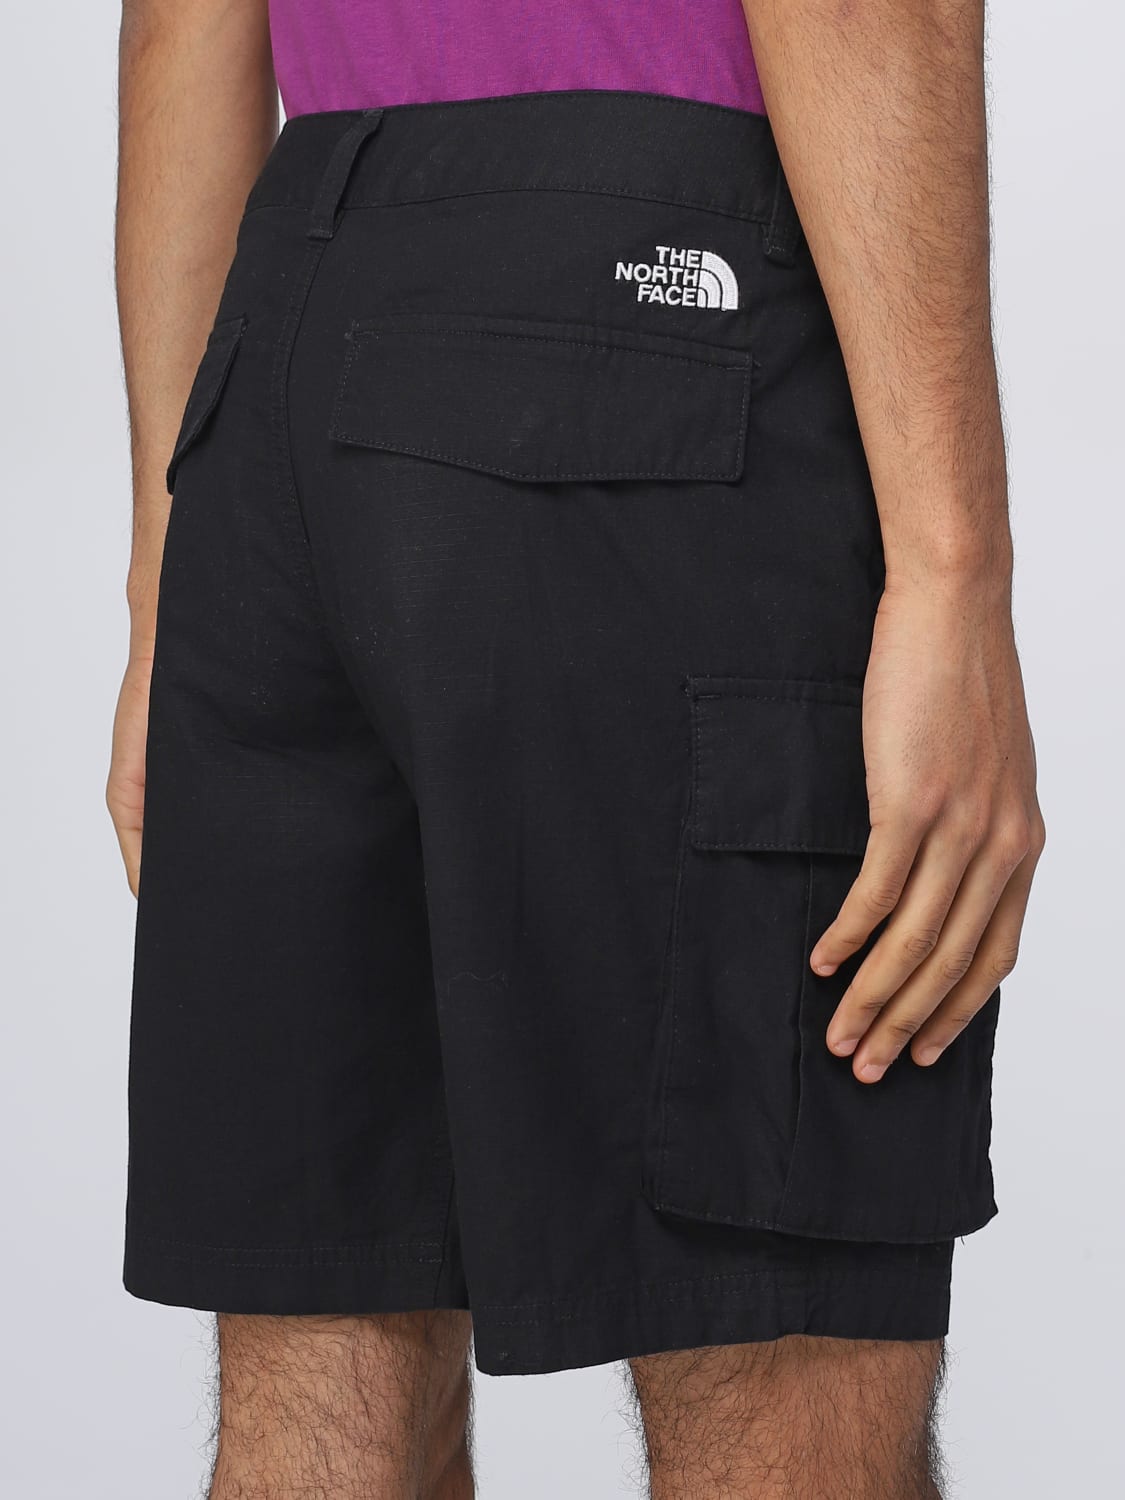 Lief Vervolg Gewoon overlopen THE NORTH FACE: short for man - Black | The North Face short NF0A55B6  online on GIGLIO.COM